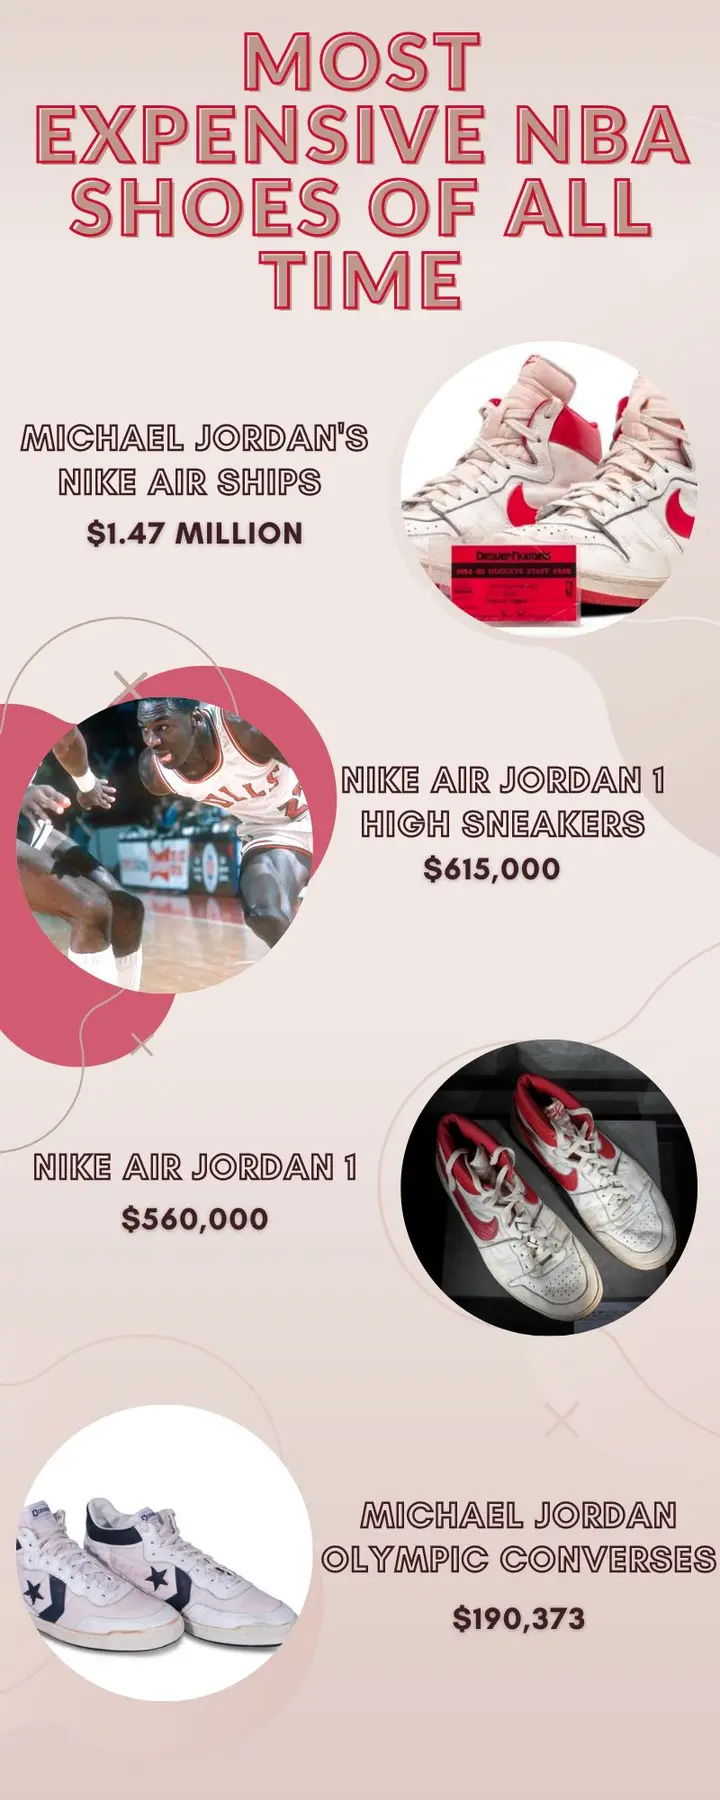 Most Expensive Shoes Of All Time: The World's Most Expensive